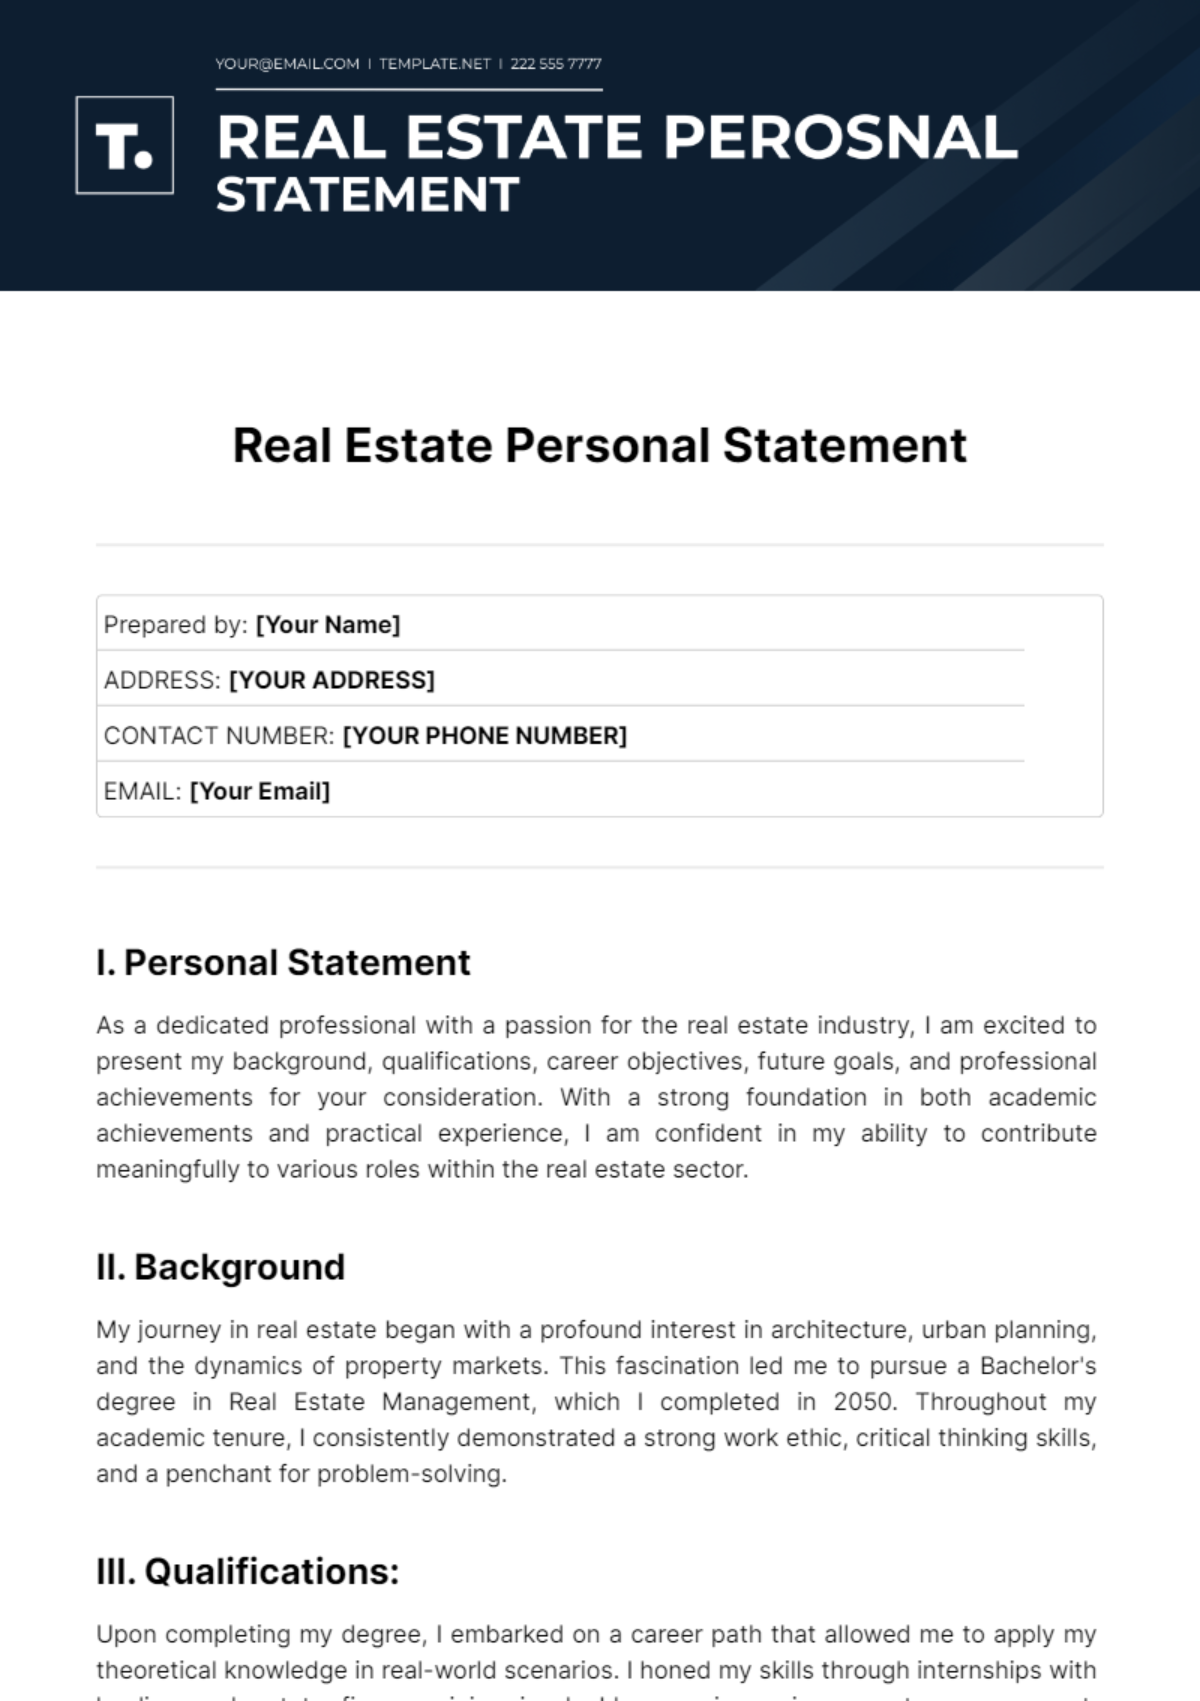 Real Estate Personal Statement Template